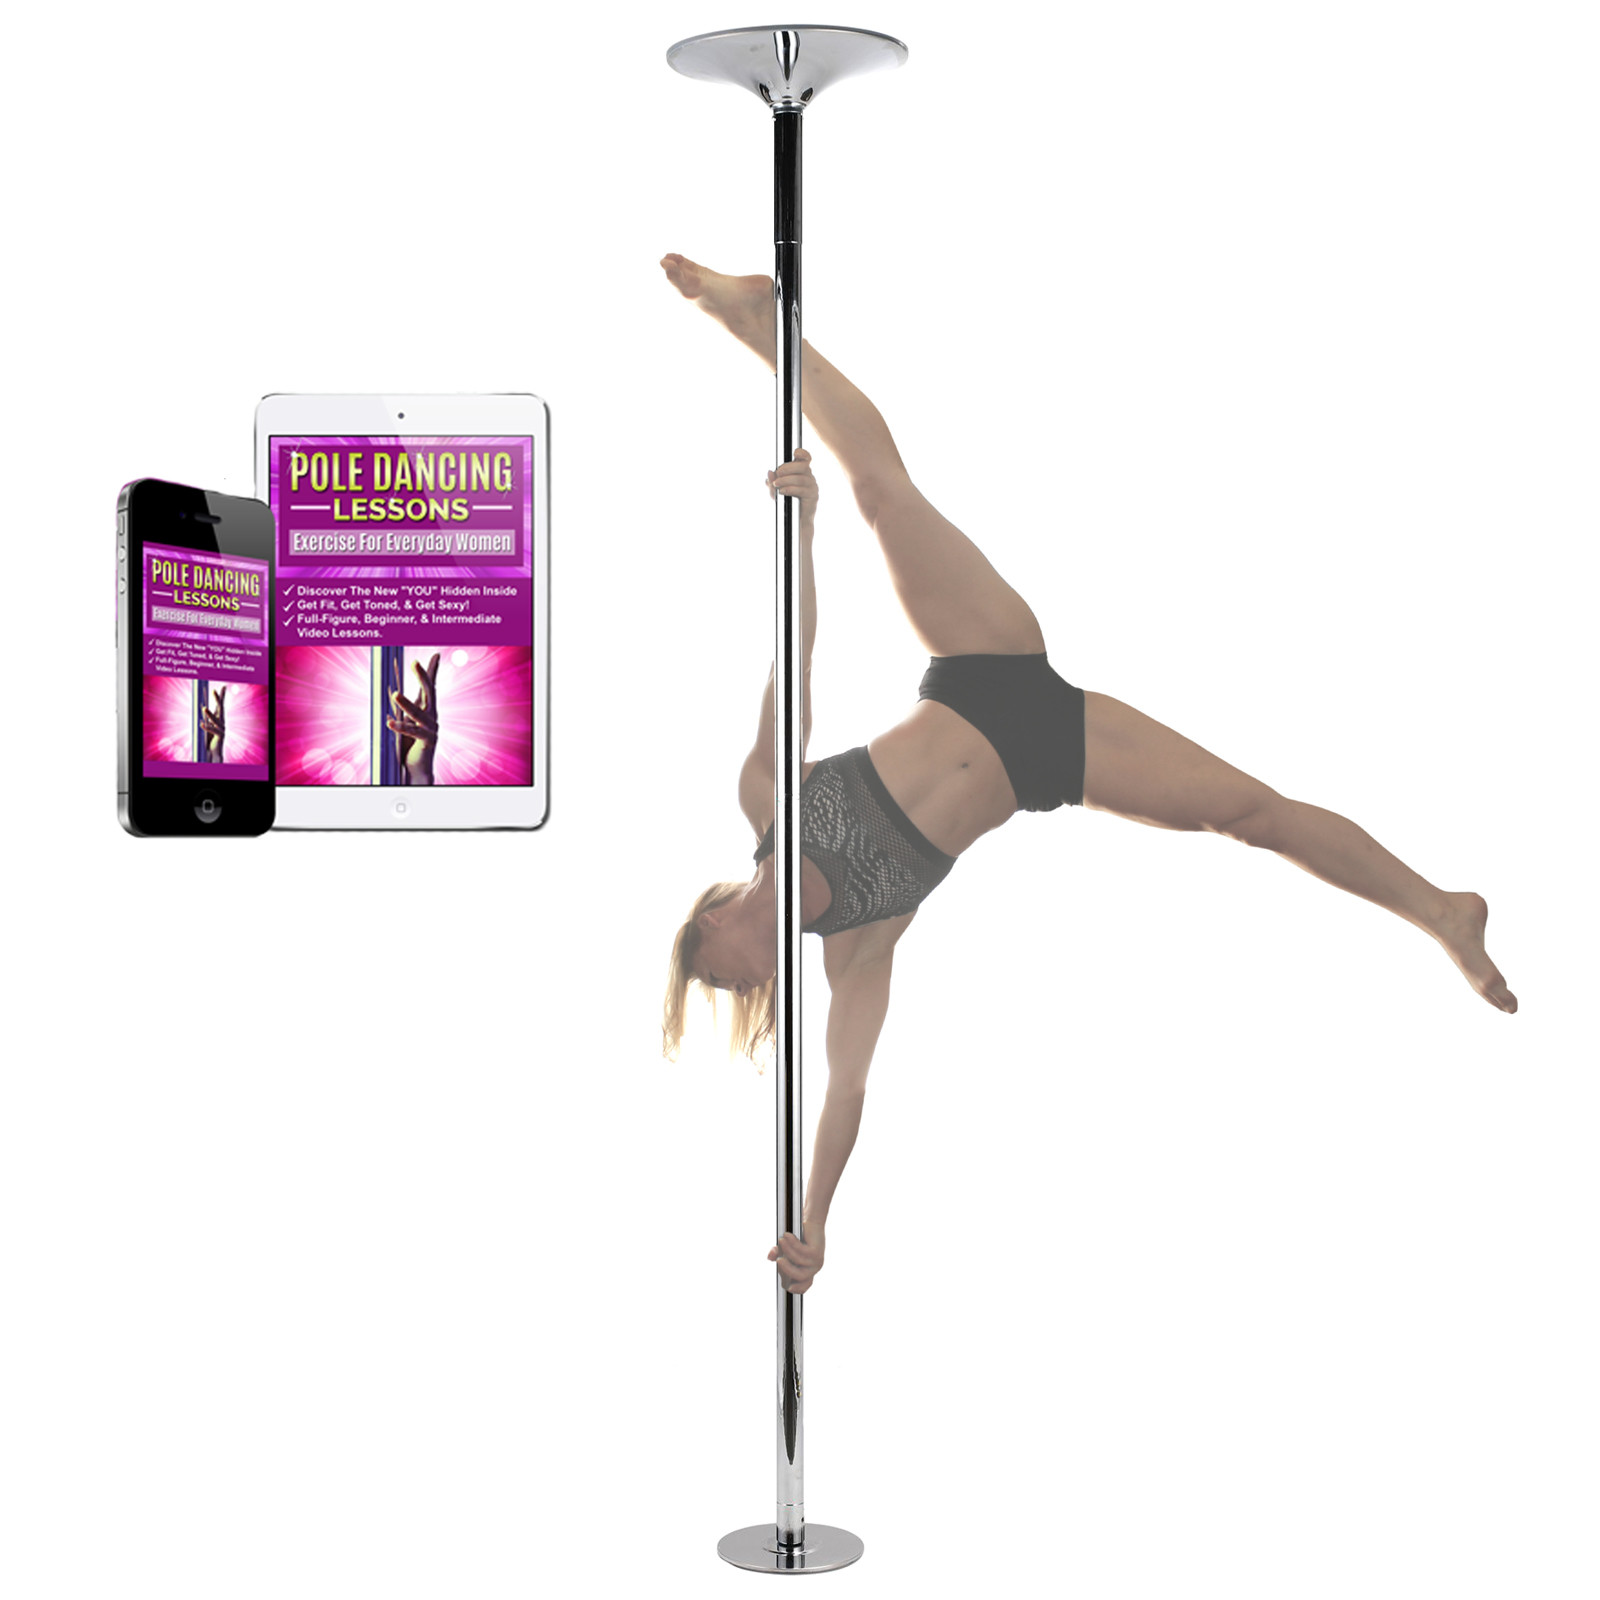 Strippers pole dancing video